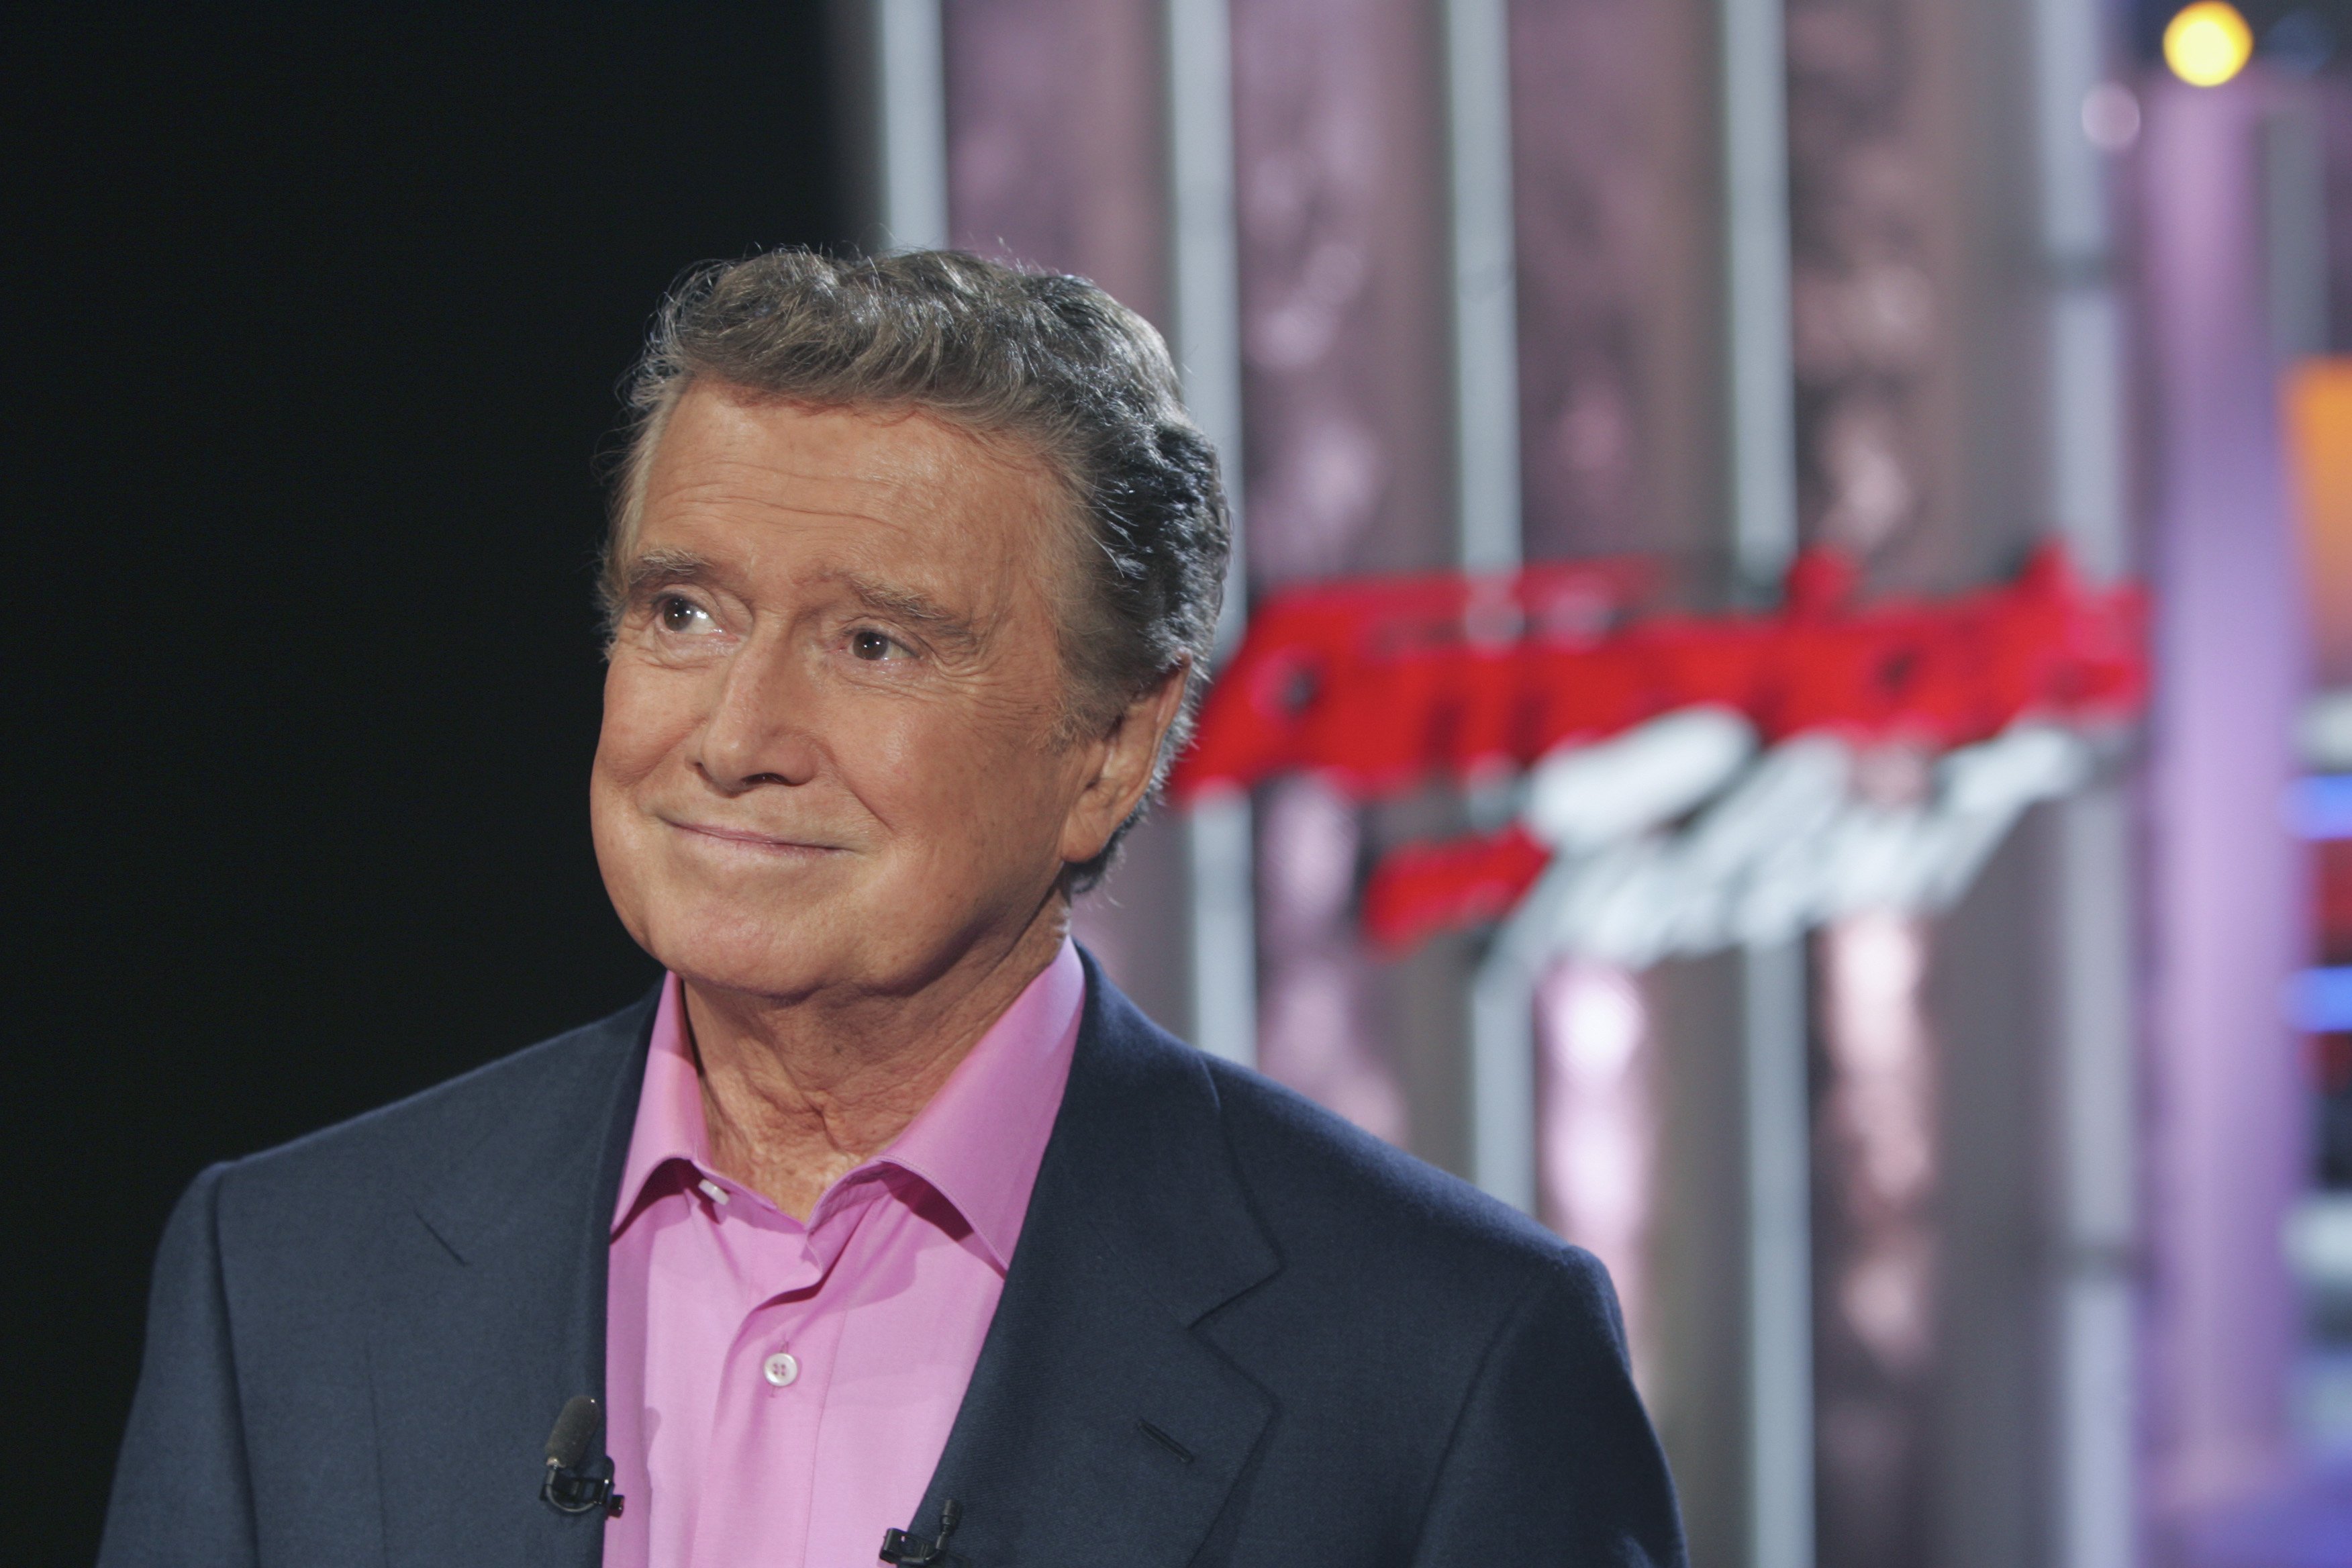 Regis Philbin as the host of "America's Got Talent" on June 21, 2006 | Source: Getty Images